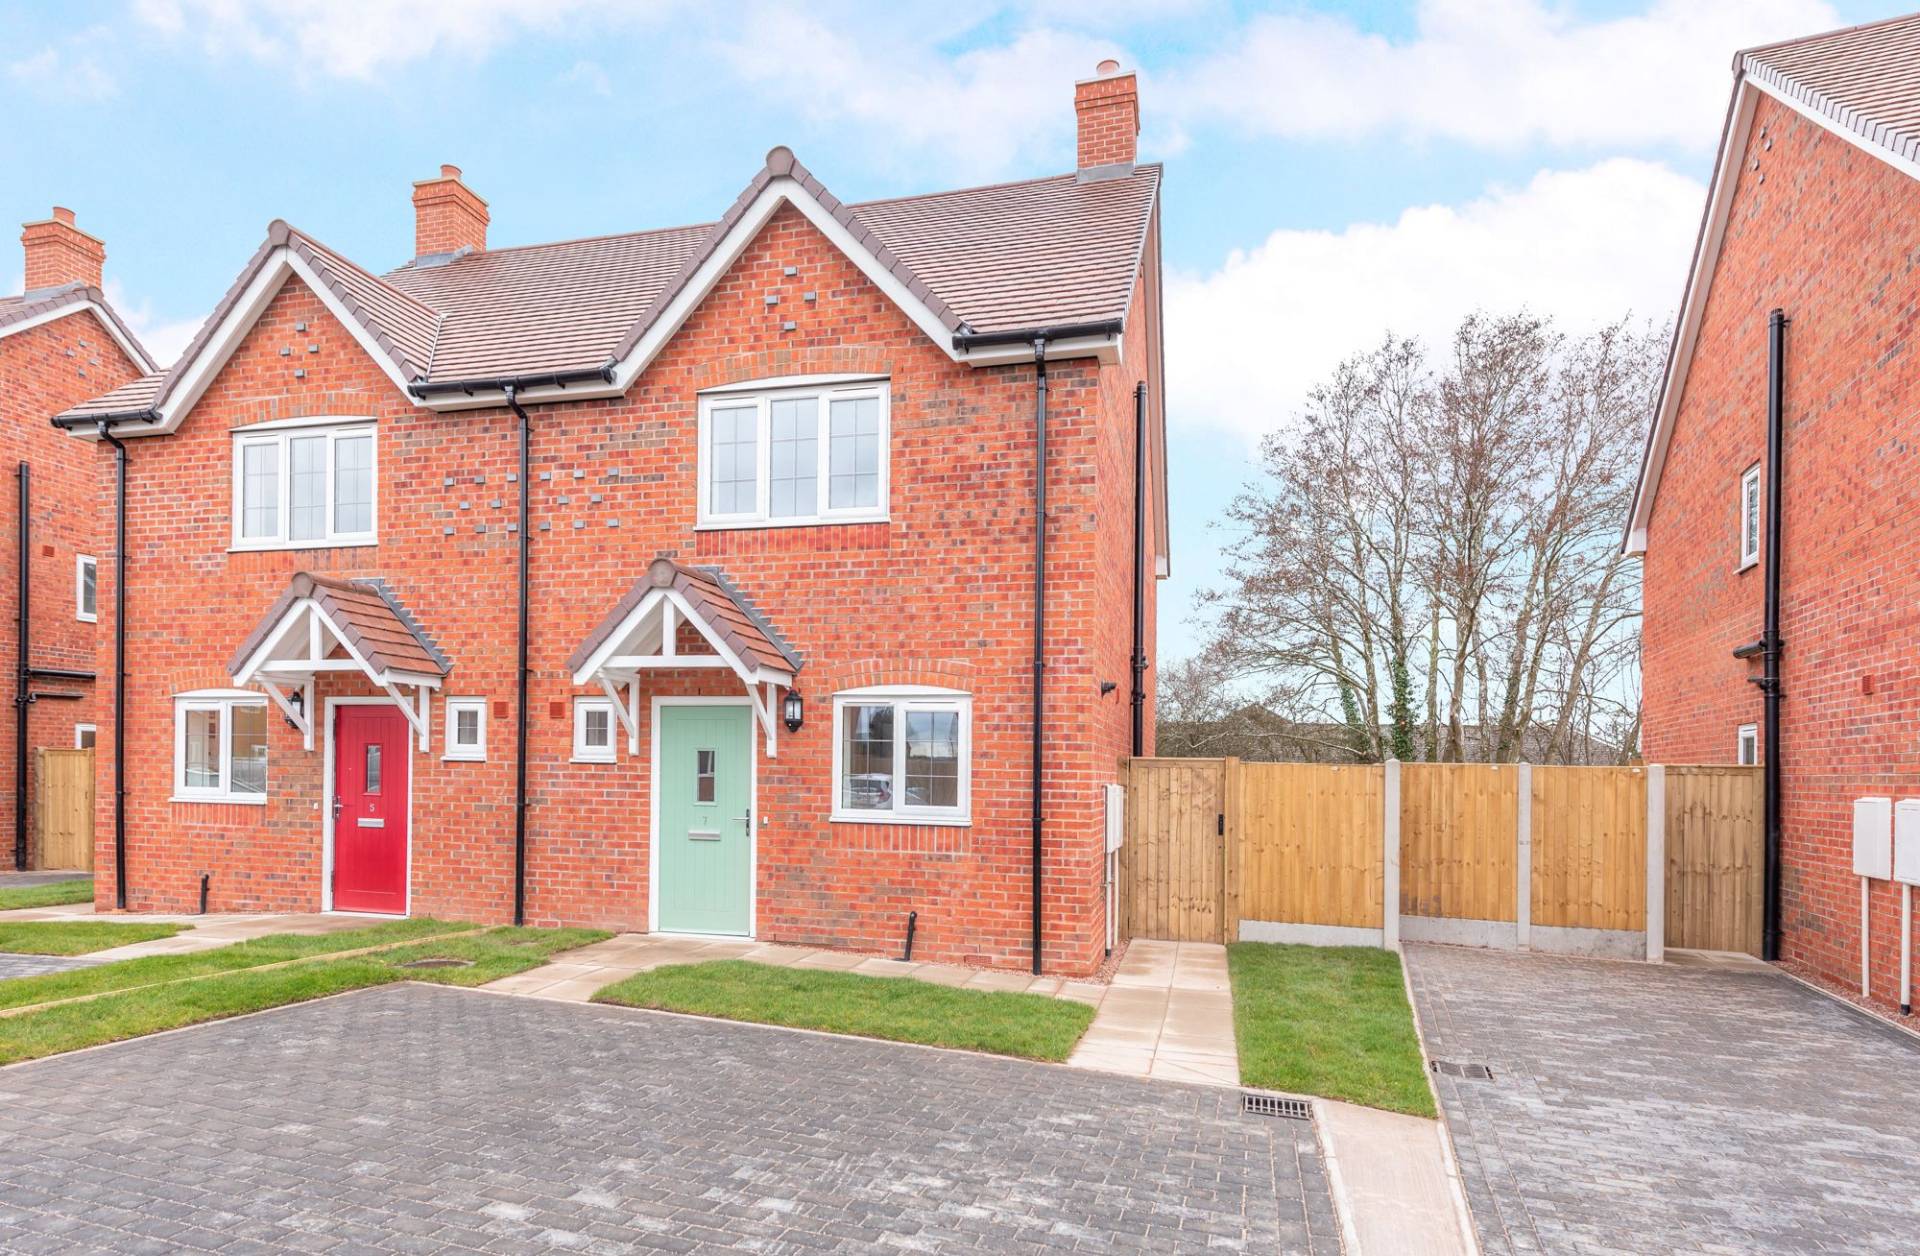 A development of 20 semi-detached two and three-bedroomed houses in Shawbury, Shropshire.  The contract with Floreat Housing Group, worth around £2.2million, began in March 2018 and is expected to complete in March 2019.